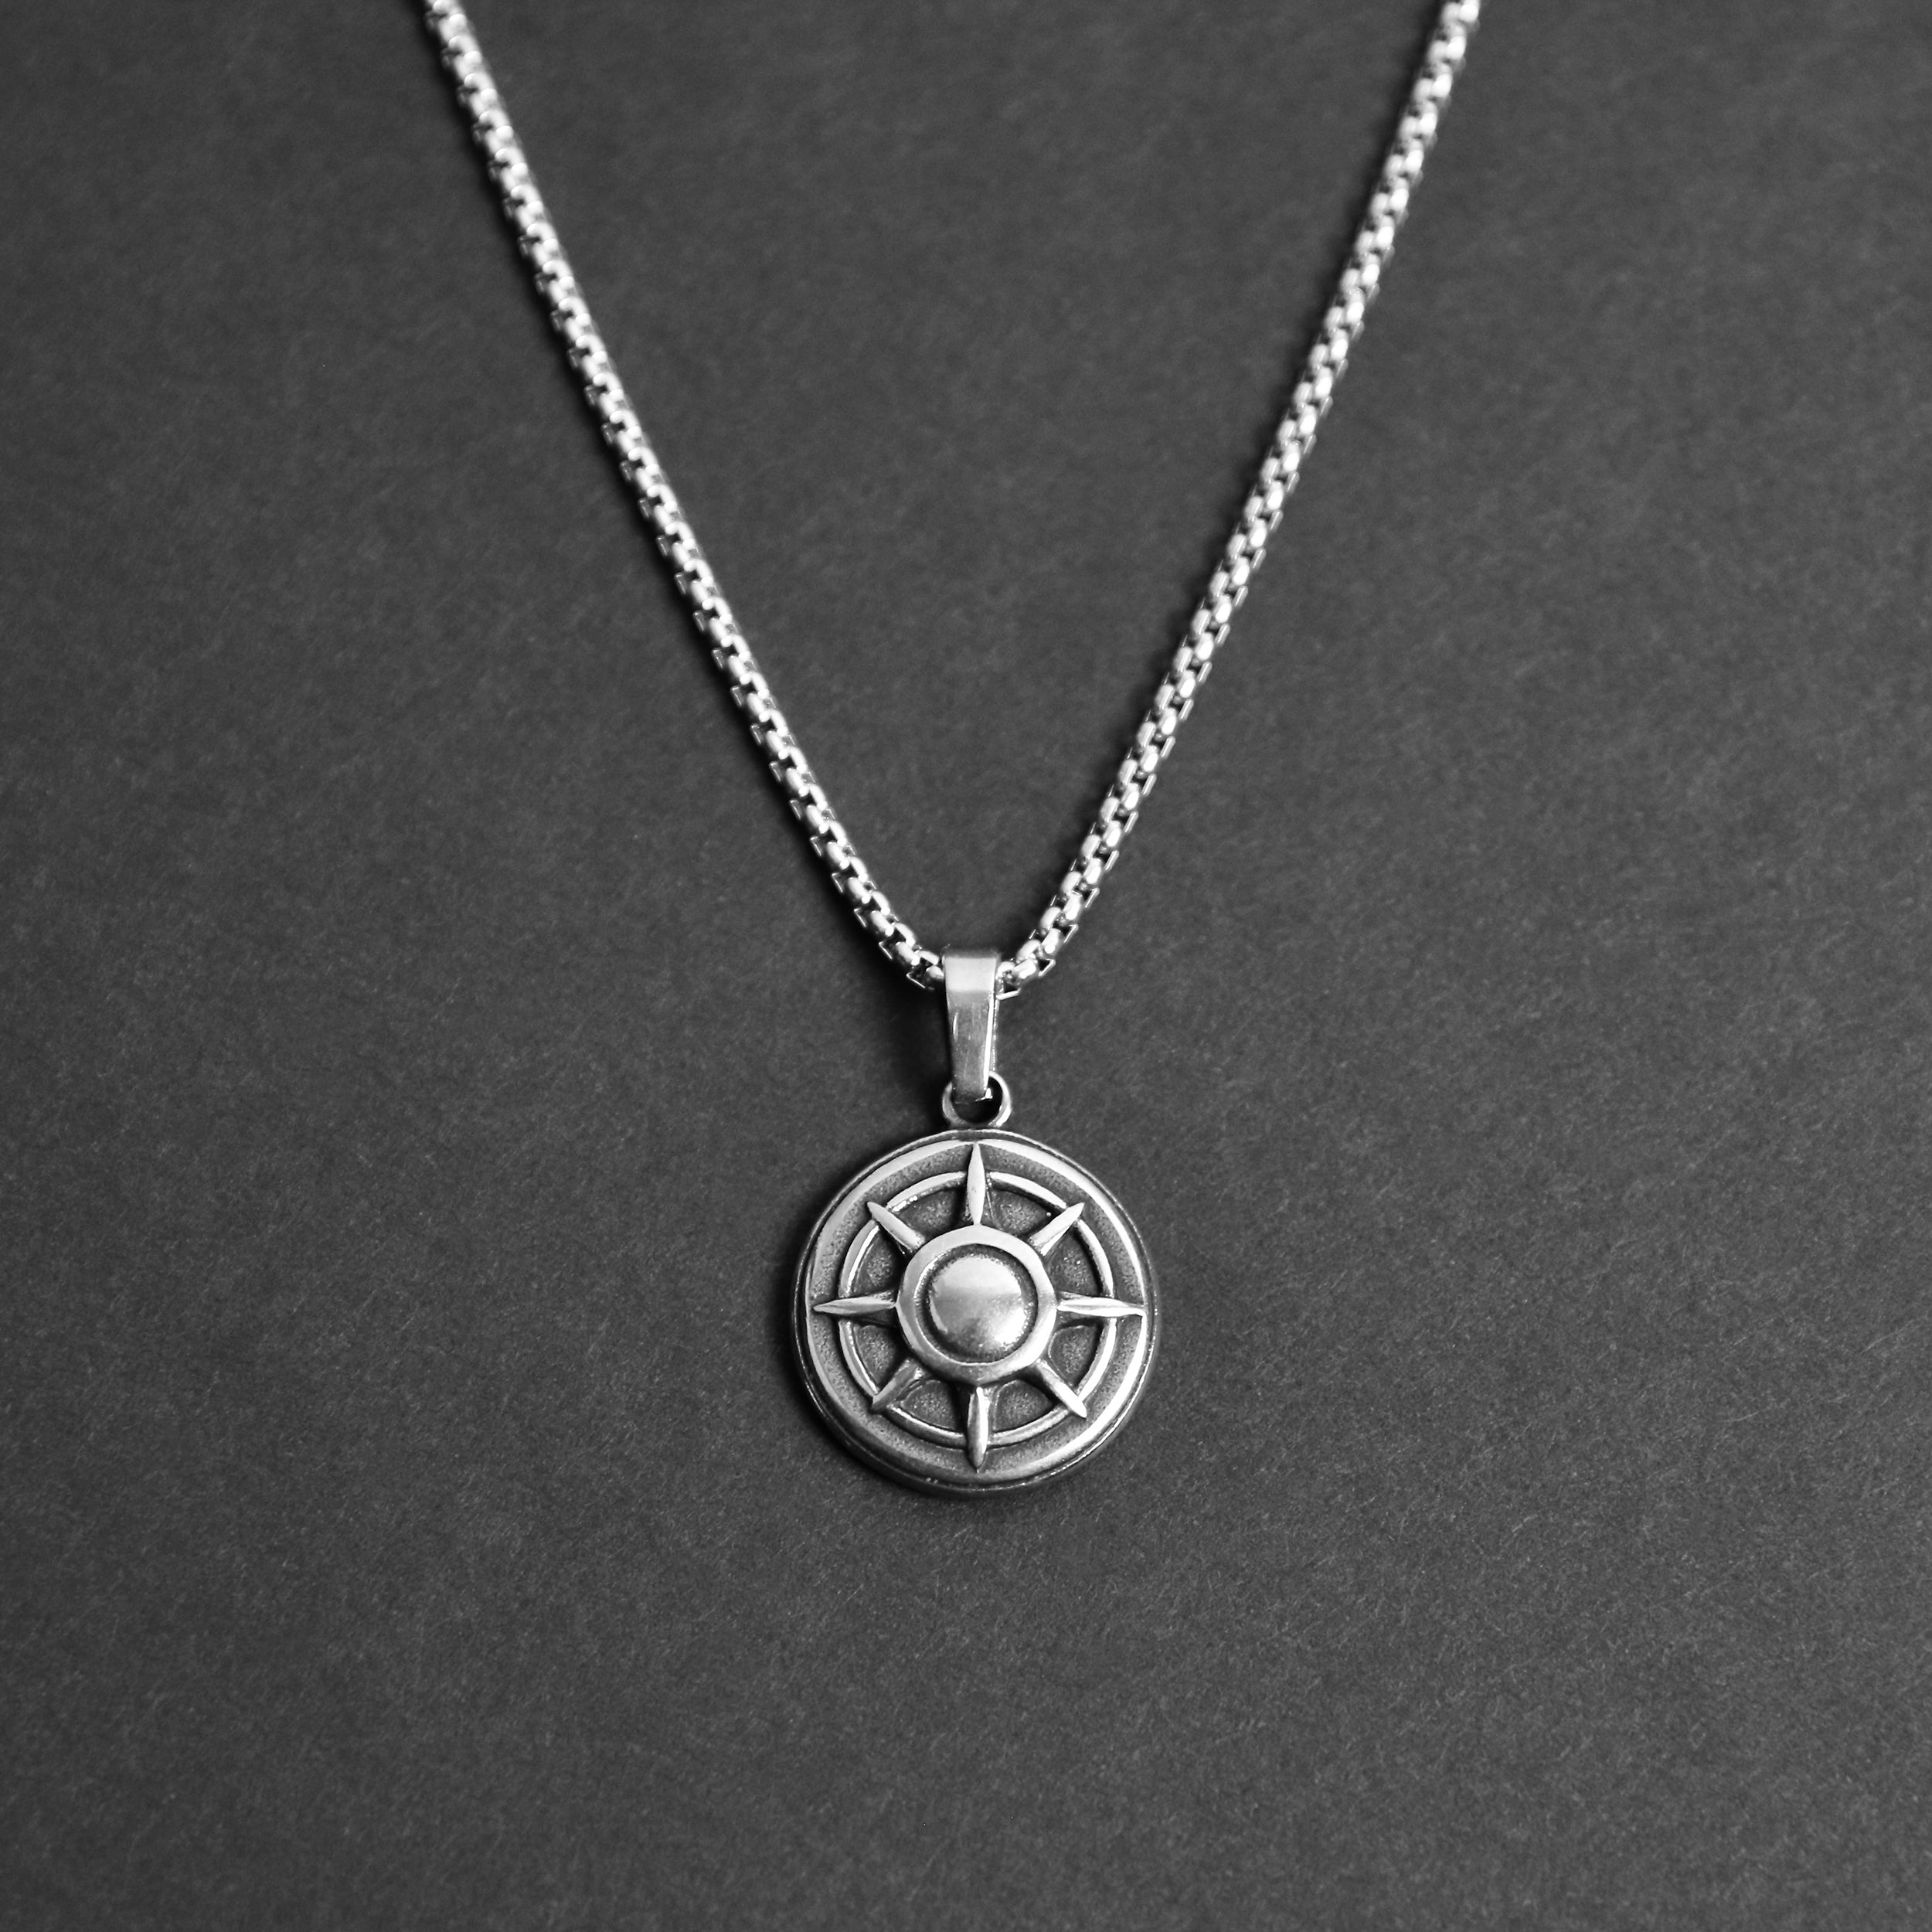 Seeker Compass Necklace - Silver